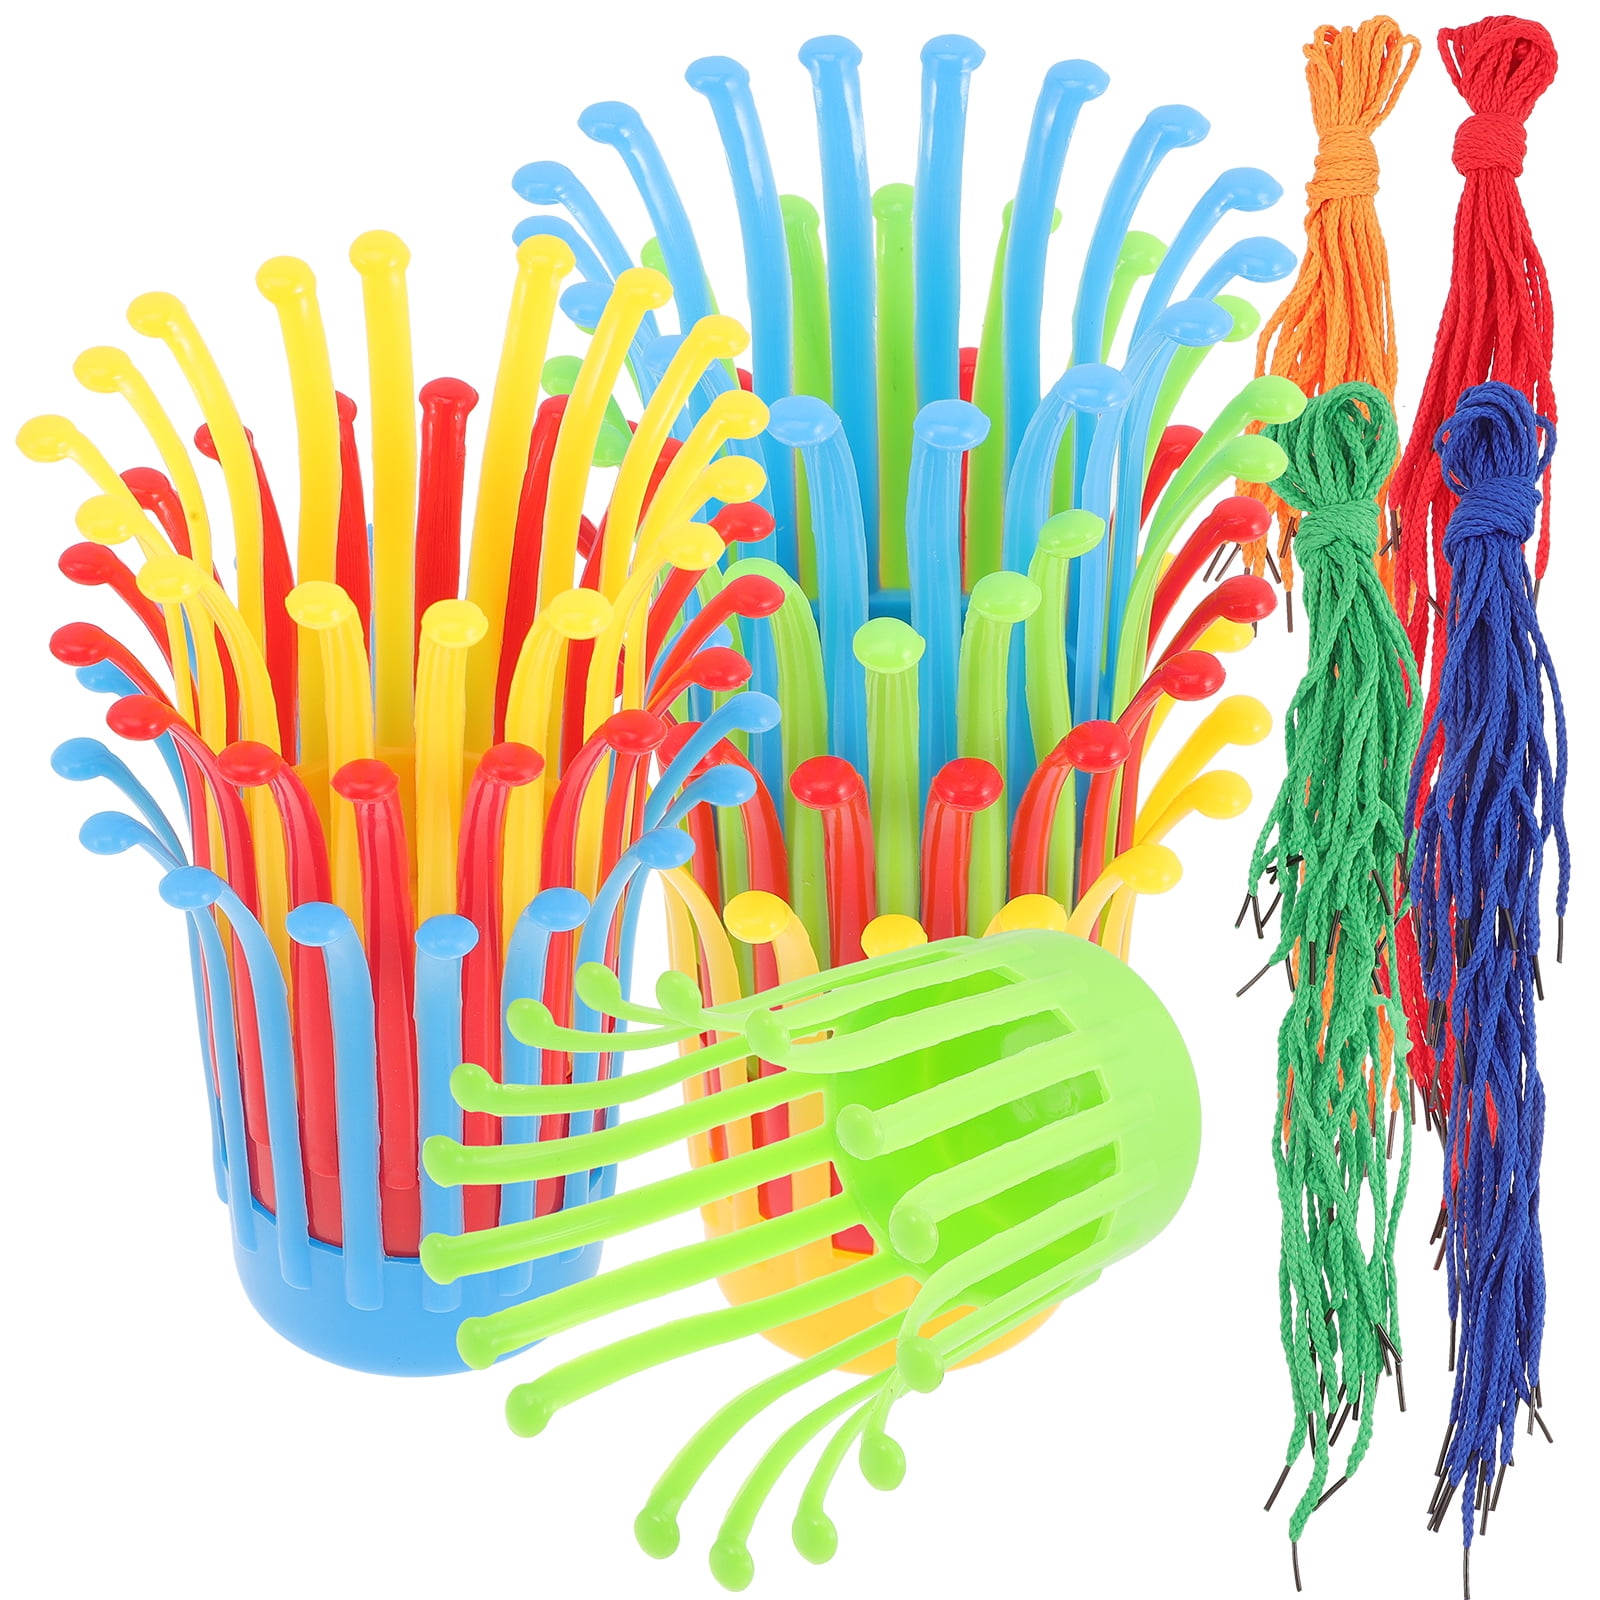 Traditional Coiled Basket Weaving Kit - makes one 4in.-6in. Basket